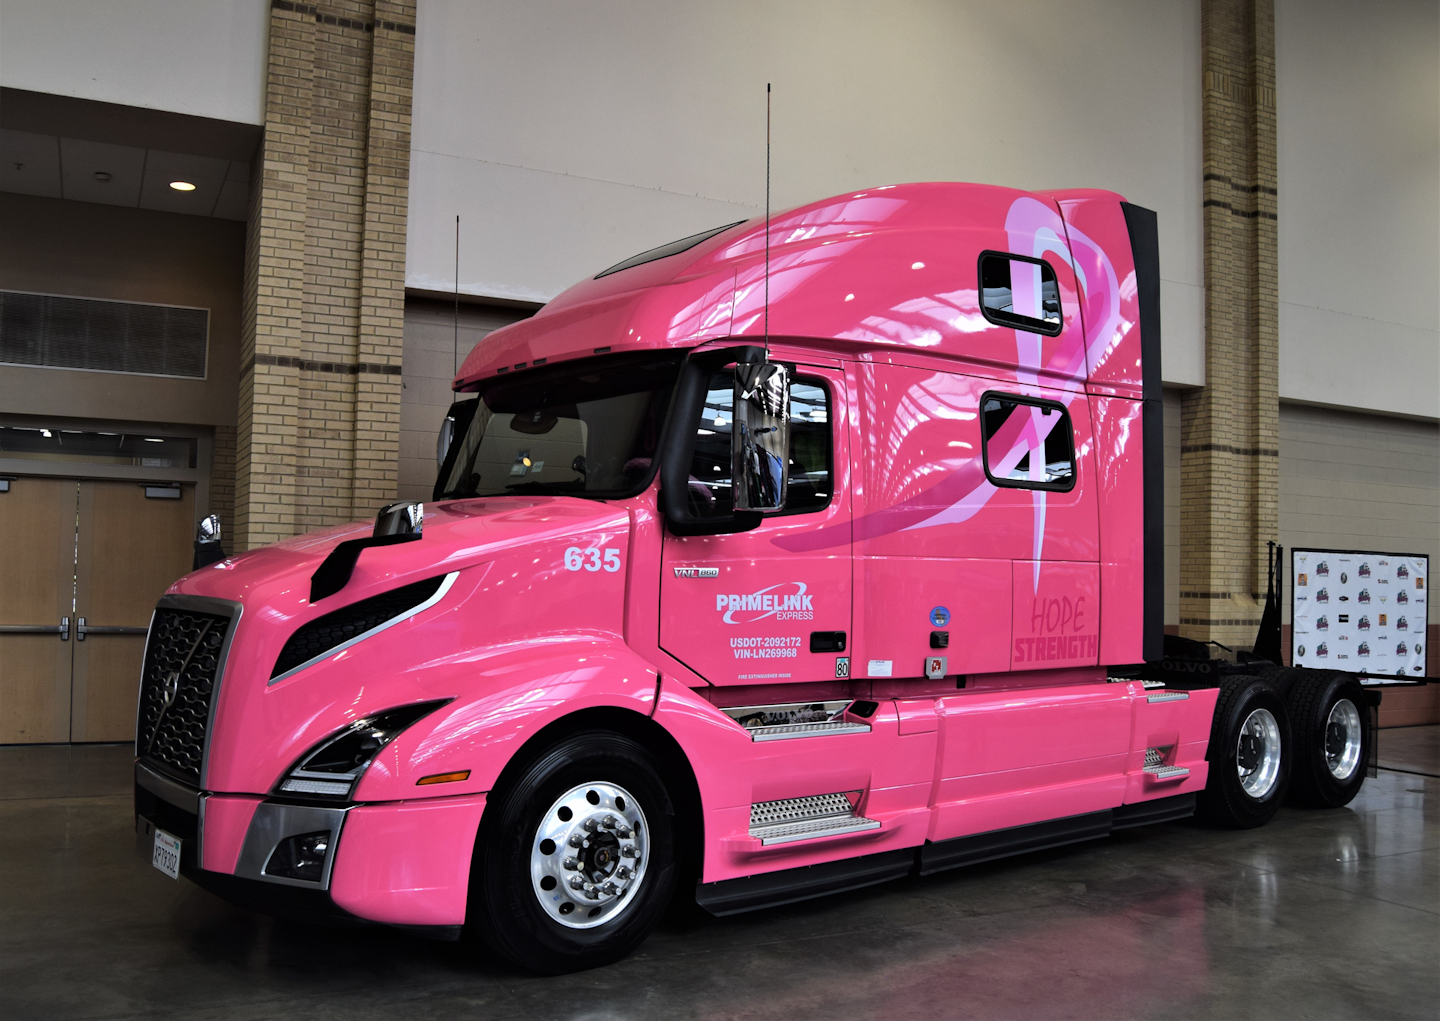 California-based Primelink Express' CFO Sunny Vraitch spoke to the lineage of this breast-cancer-awareness Volvo on display just inside the entrance to the SHE Trucking Expo show floor. The company decked the Volvo out this way as a way of giving back to one of its professional drivers, whose mother had been diagnosed with breast cancer and was undergoing chemo. The company worked with the Susan G. Komen foundation to structure a long-term giving arrangement from the truck's future revenues ... 'something we did so that our driver knew that we stood with her,' Vraitch said. 'Women in trucking and diversity are really big things for us.' For any fleet owner, he stressed, 'Your drivers are your most important asset. If you take care of your driver, they will take care of your customer, ... your equipment,' you name it.